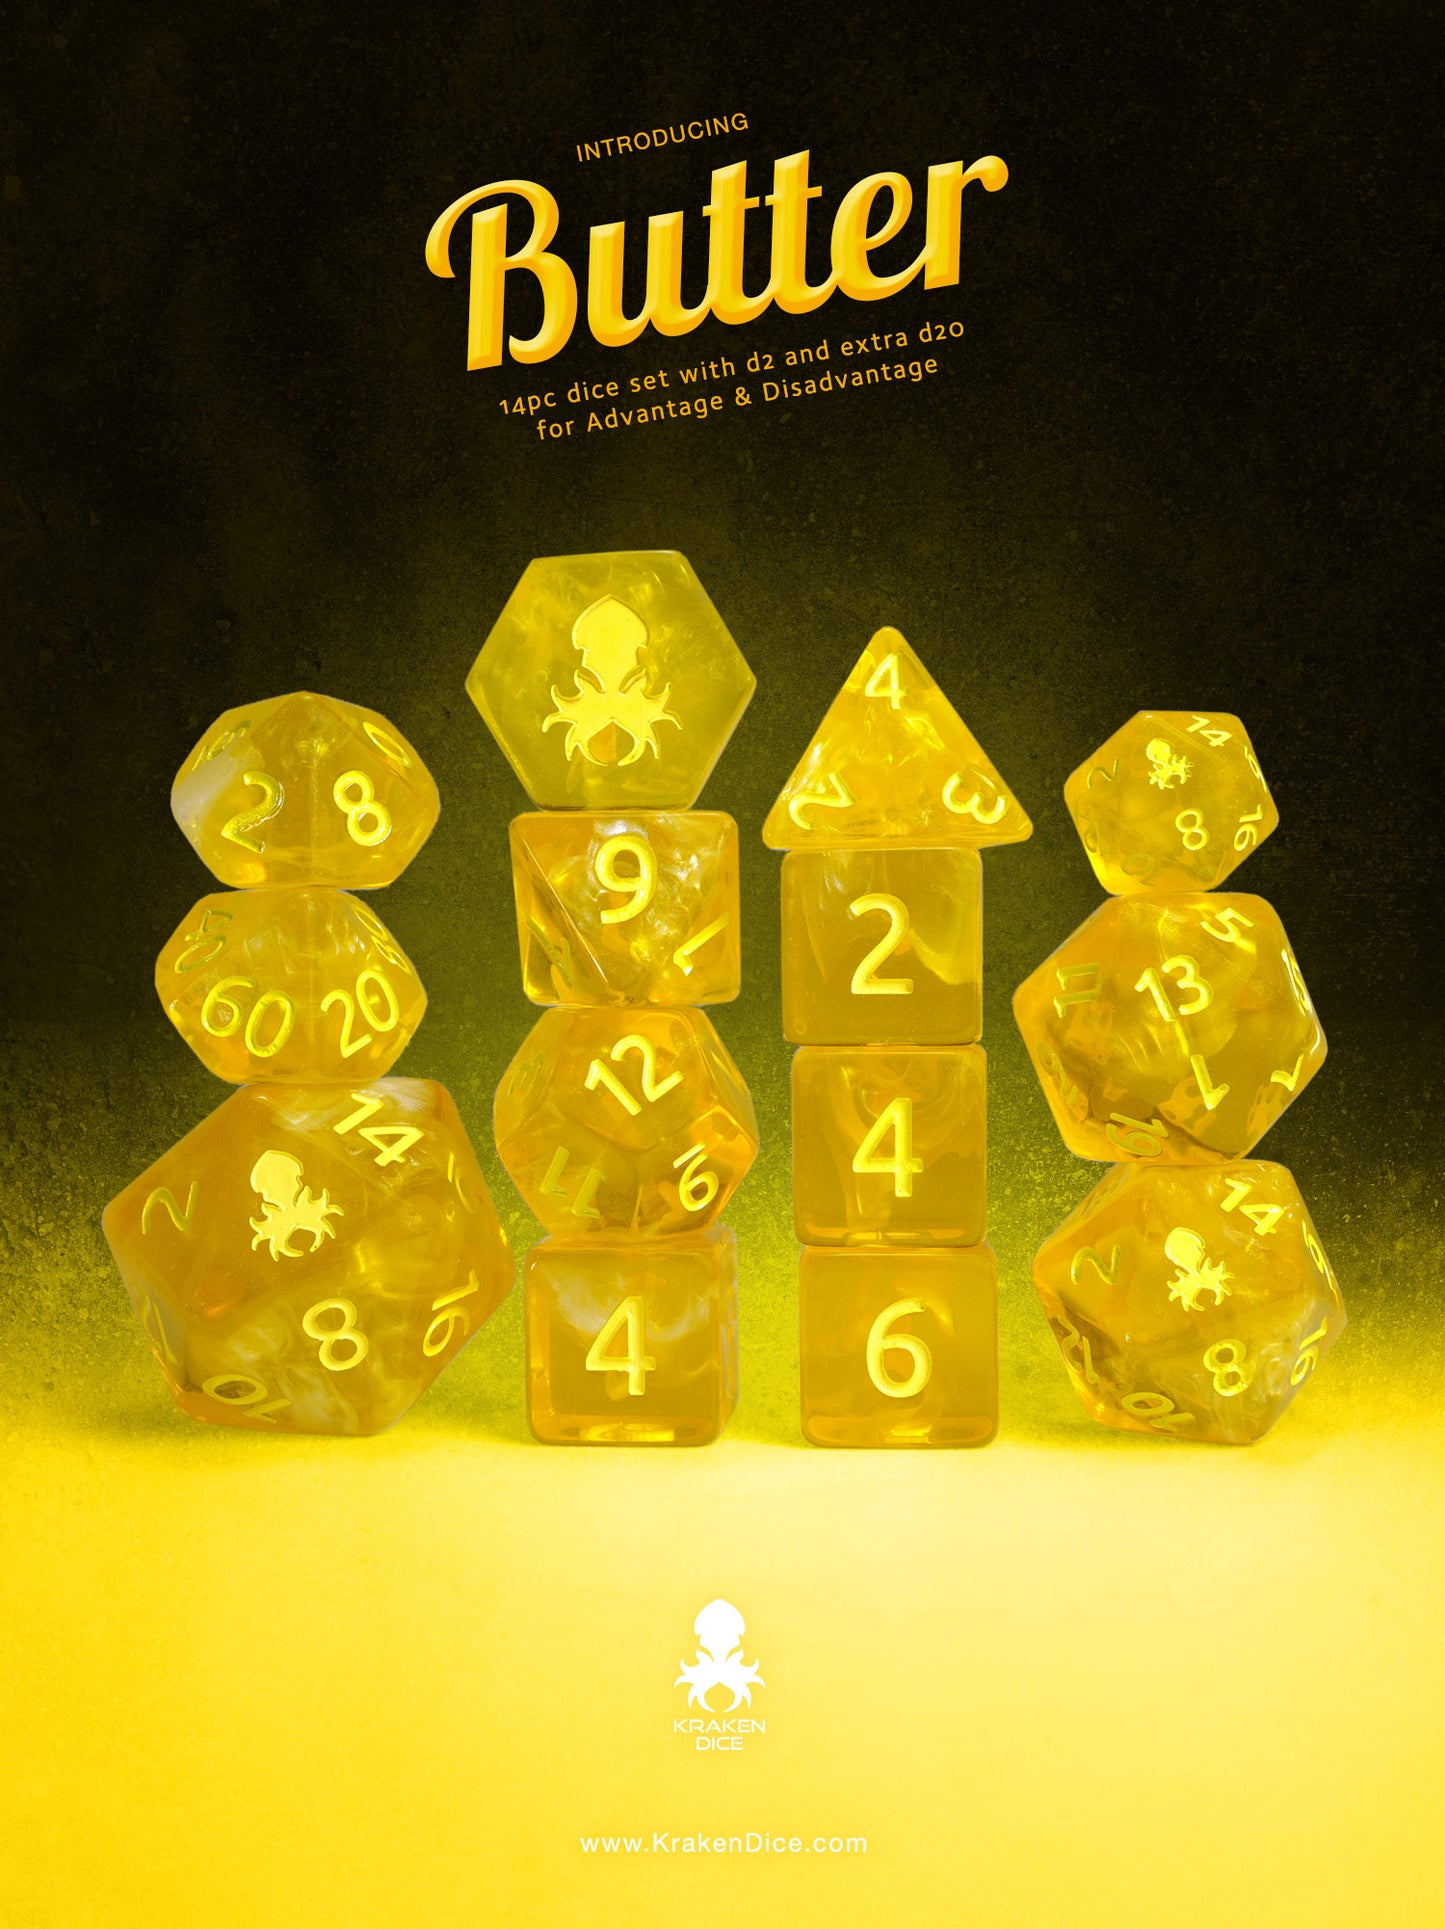 Butter 14 piece dice set inked in yellow